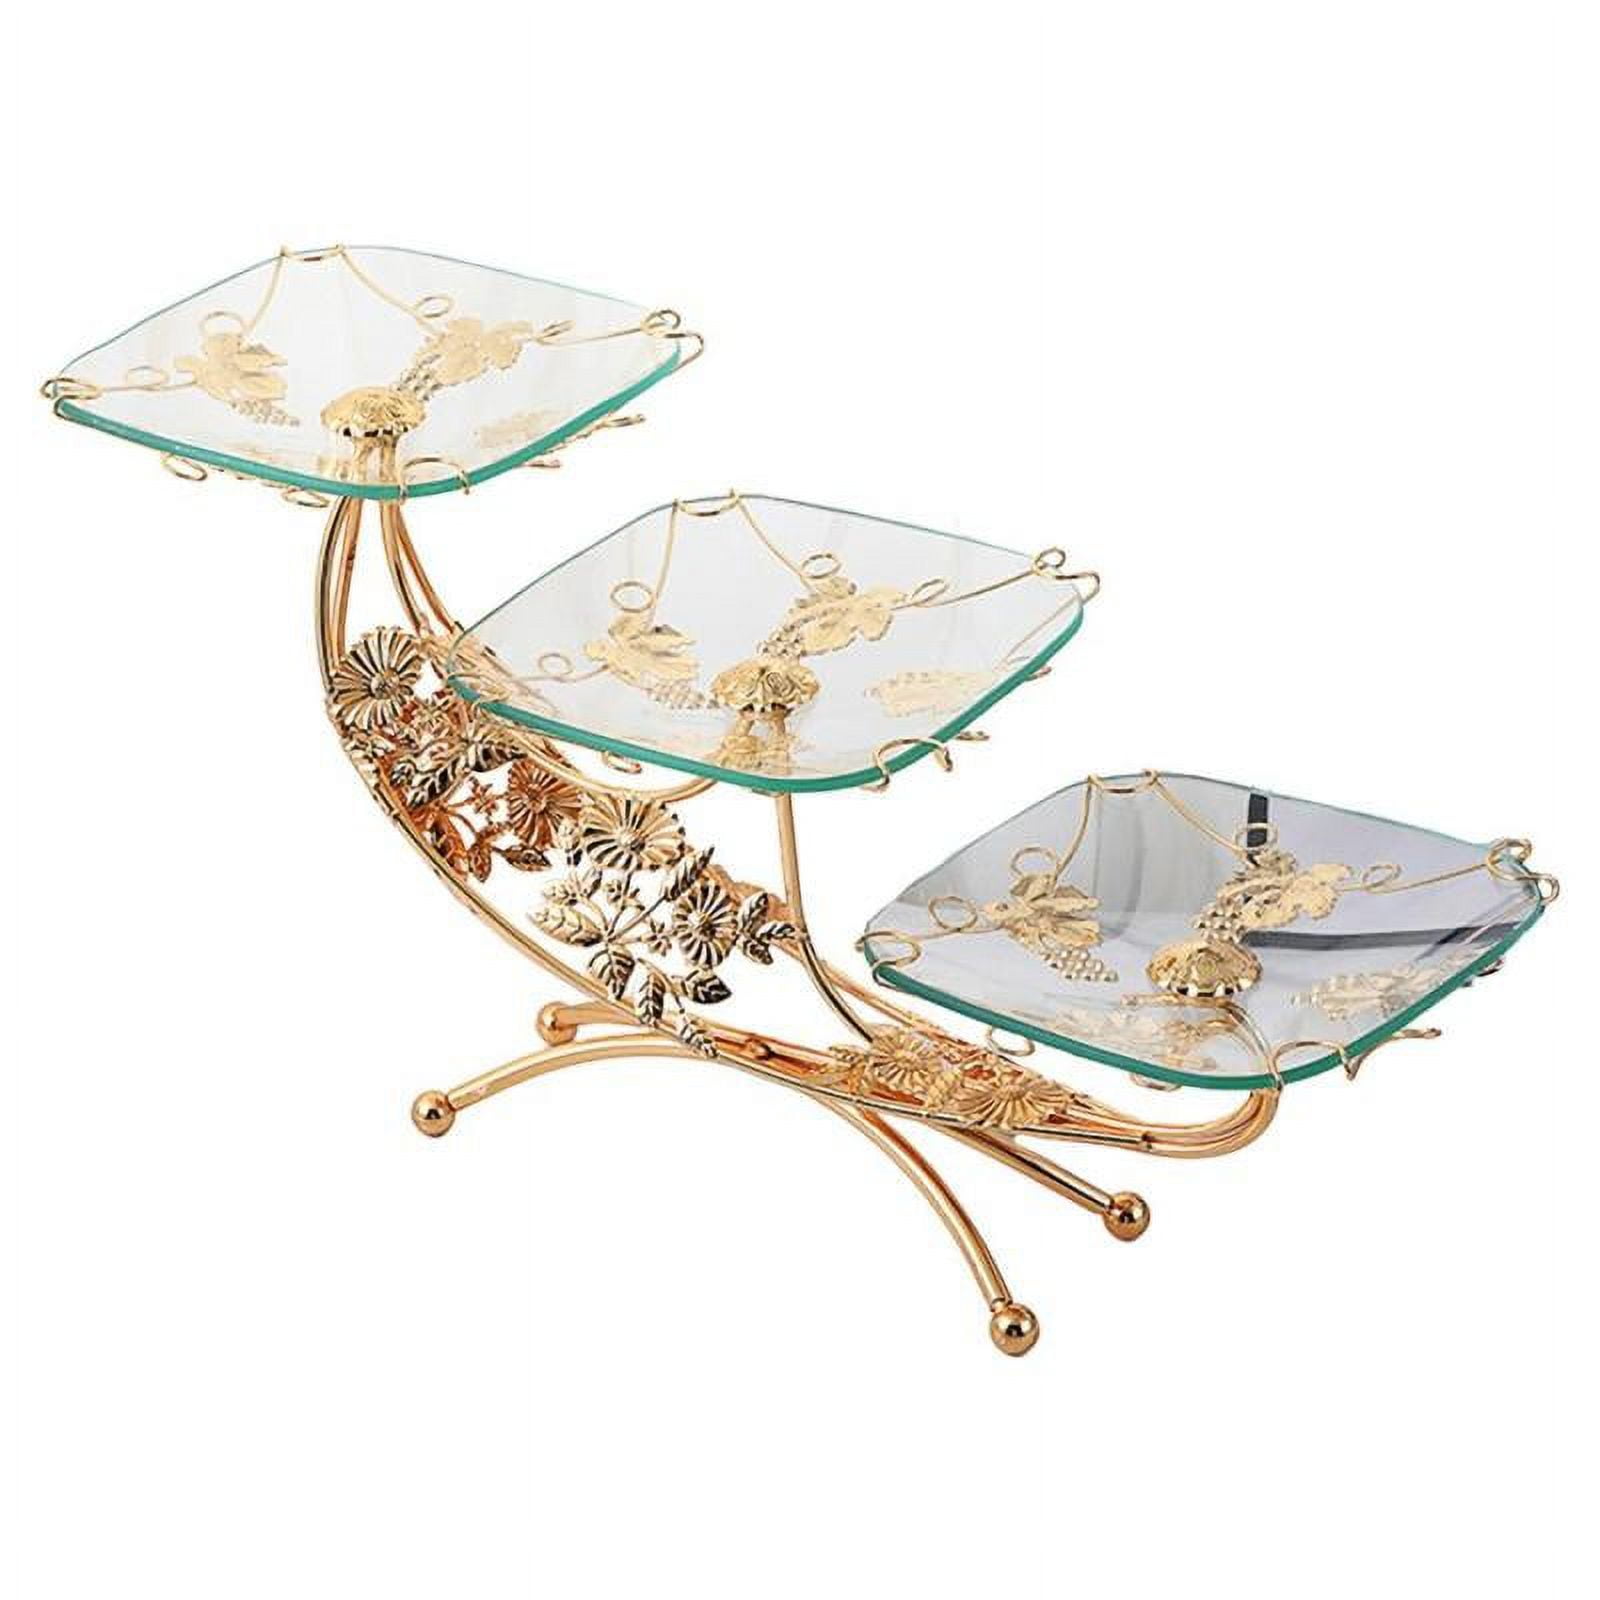 Fruit Plate Rectangle Serving Tray Decorative Snacks Tray Simple Modern  Perfume Holder Storage Tray for Towels Cosmetics and Accessories  Transparent 